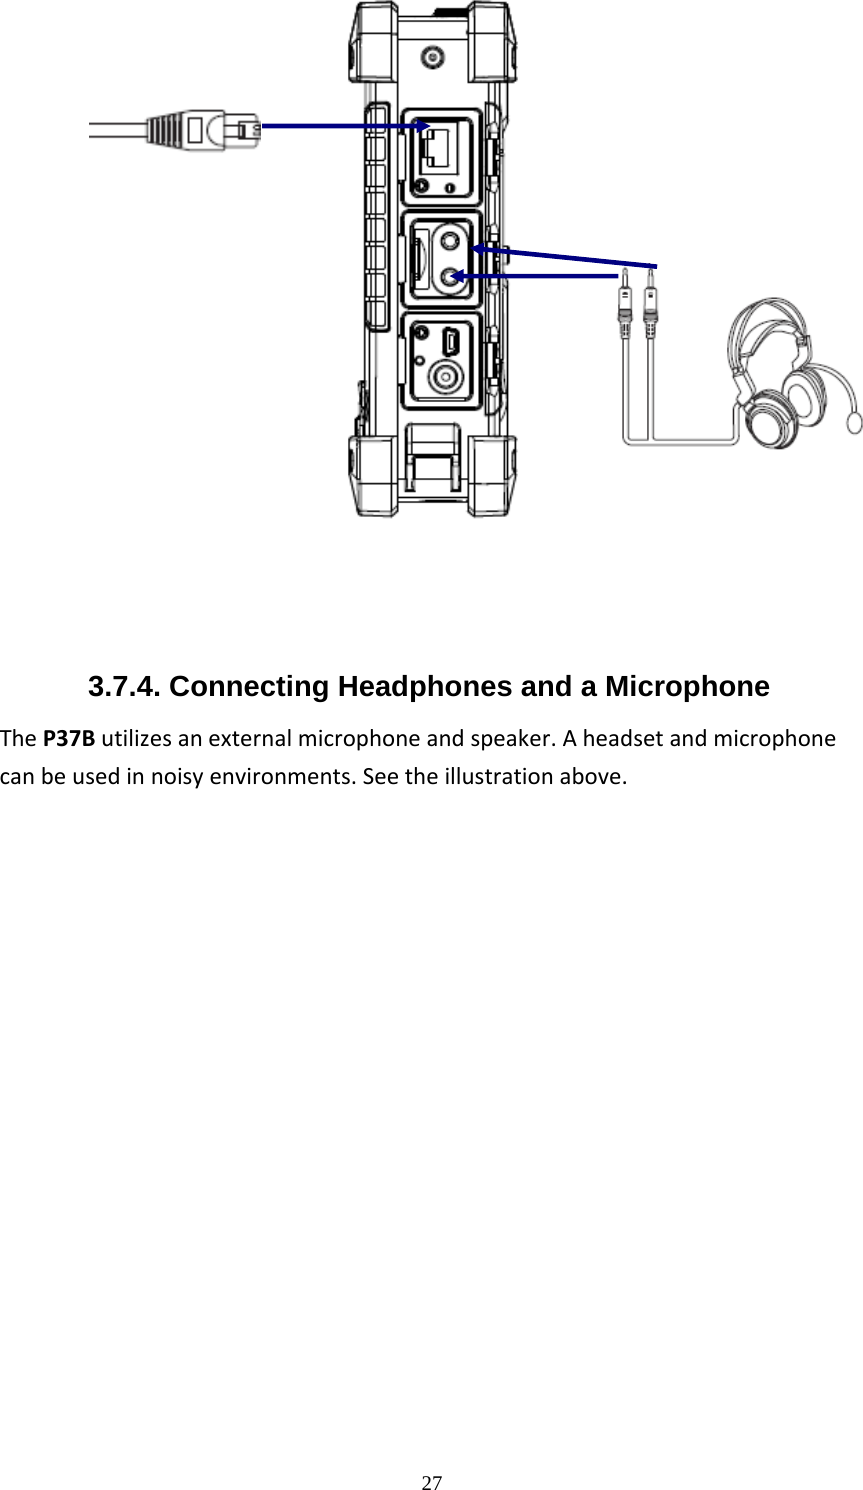  27    3.7.4. Connecting Headphones and a Microphone TheP37Butilizesanexternalmicrophoneandspeaker.Aheadsetandmicrophonecanbeusedinnoisyenvironments.Seetheillustrationabove.              